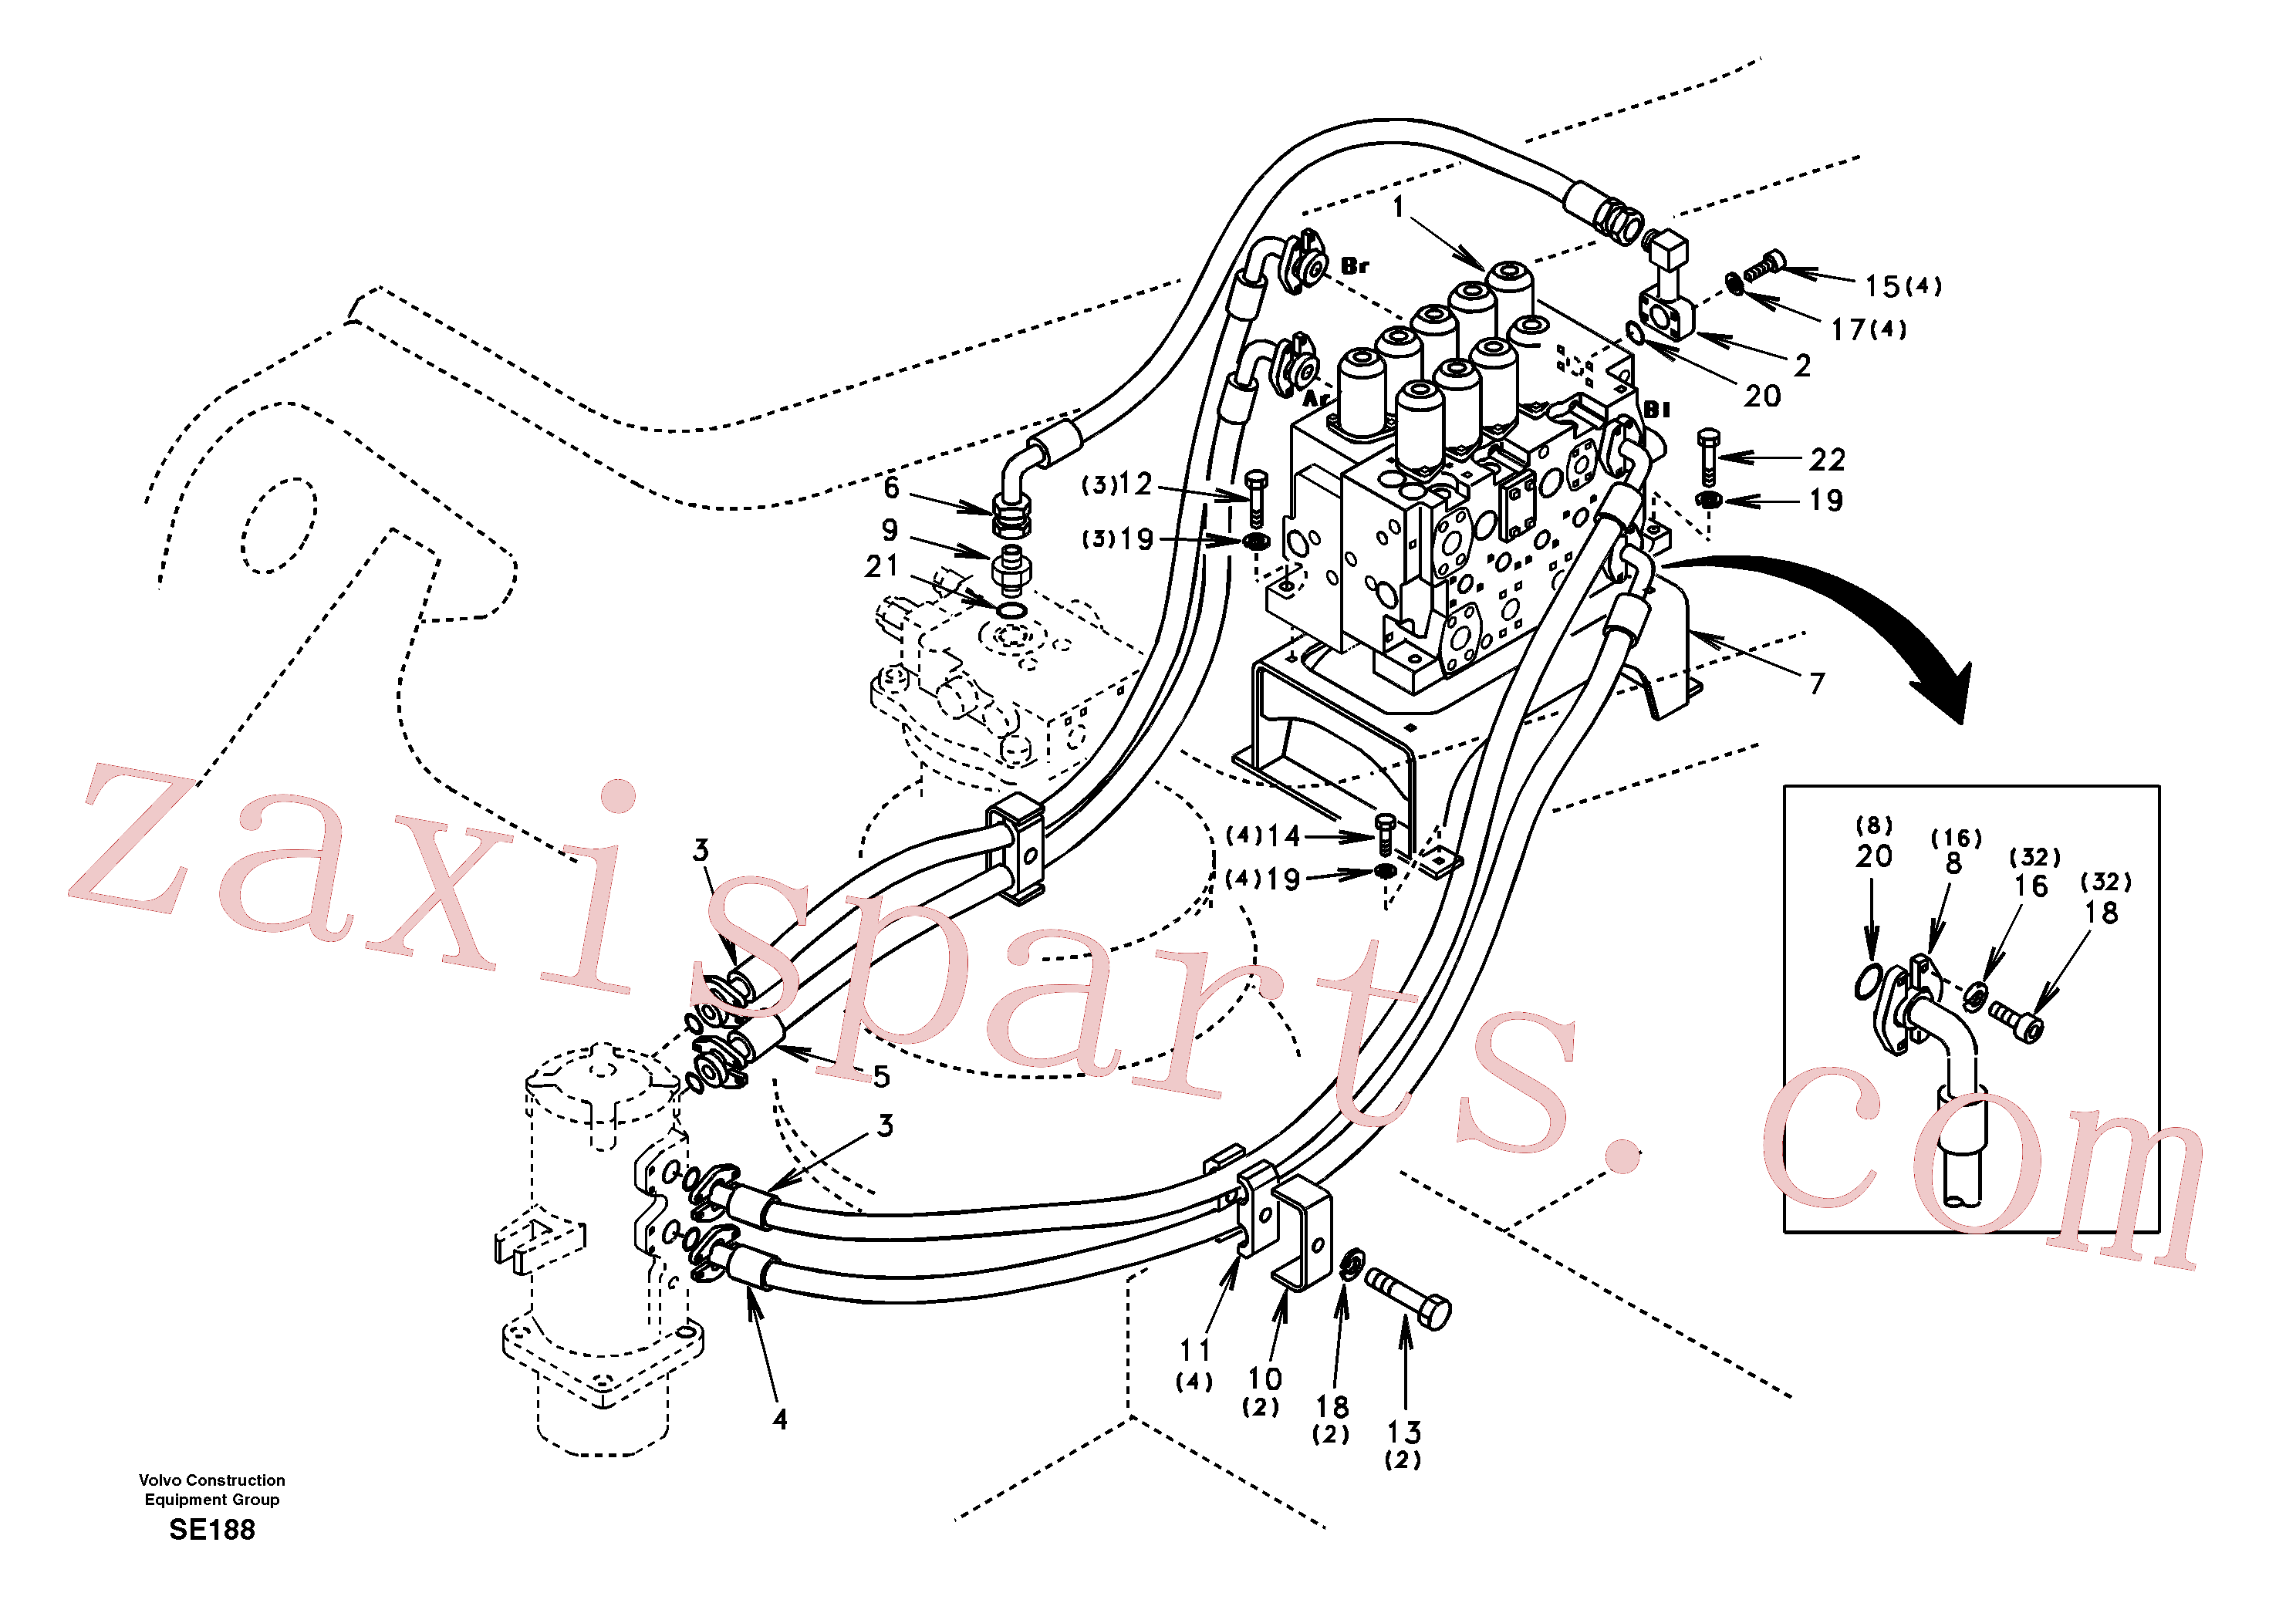 SA9016-21213 for Volvo Turning joint line, control valve to turning joint(SE188 assembly)